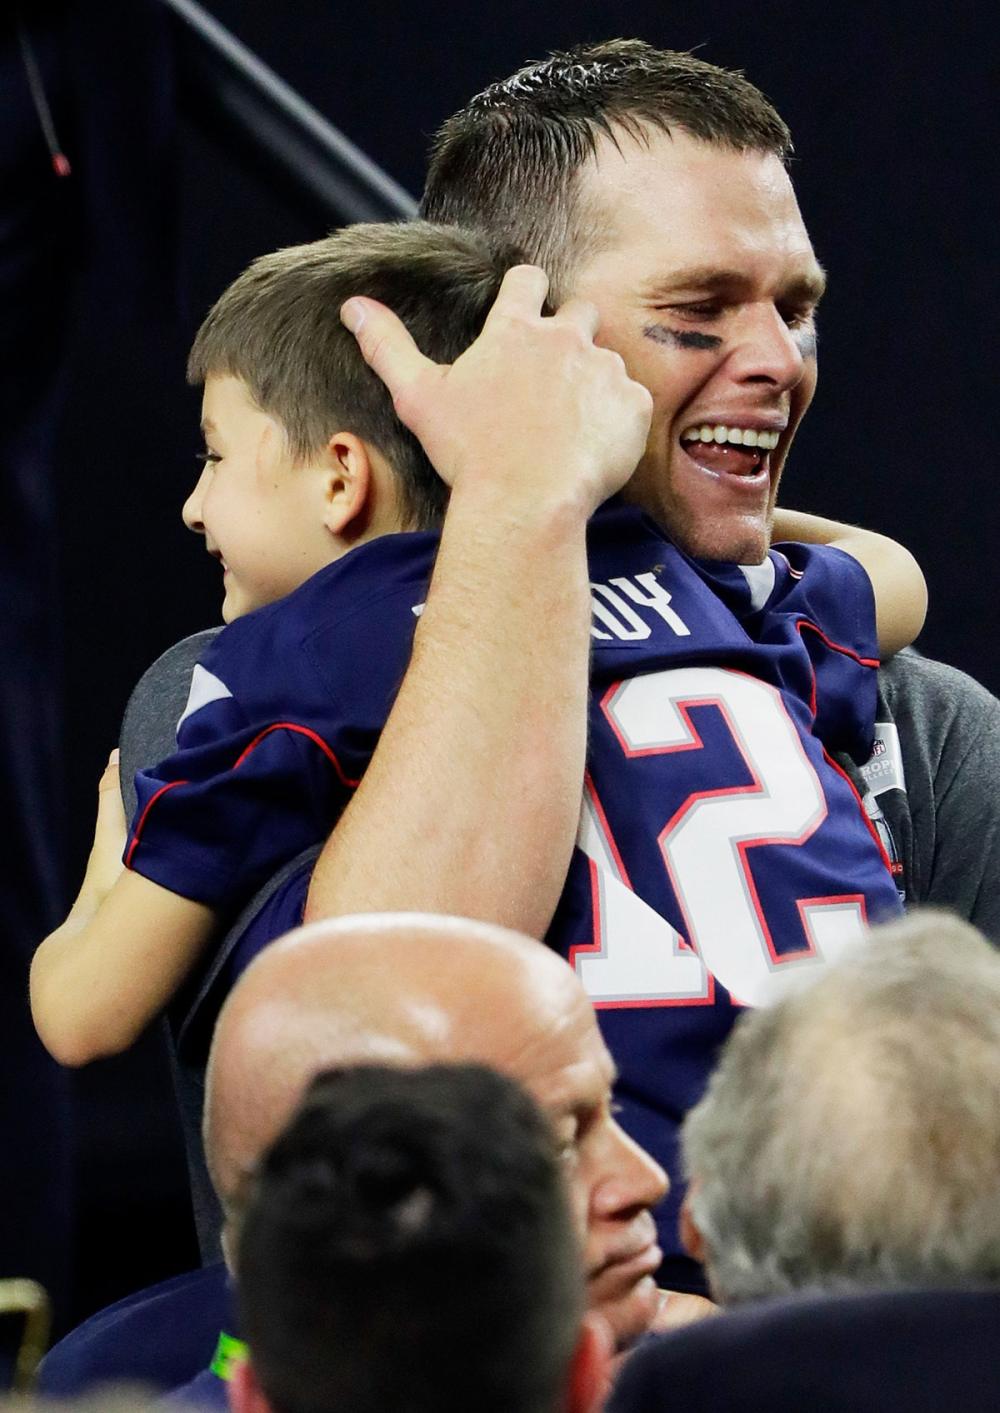 Tom Brady cries as he carries his son, Benjamin following the Super Bowl win